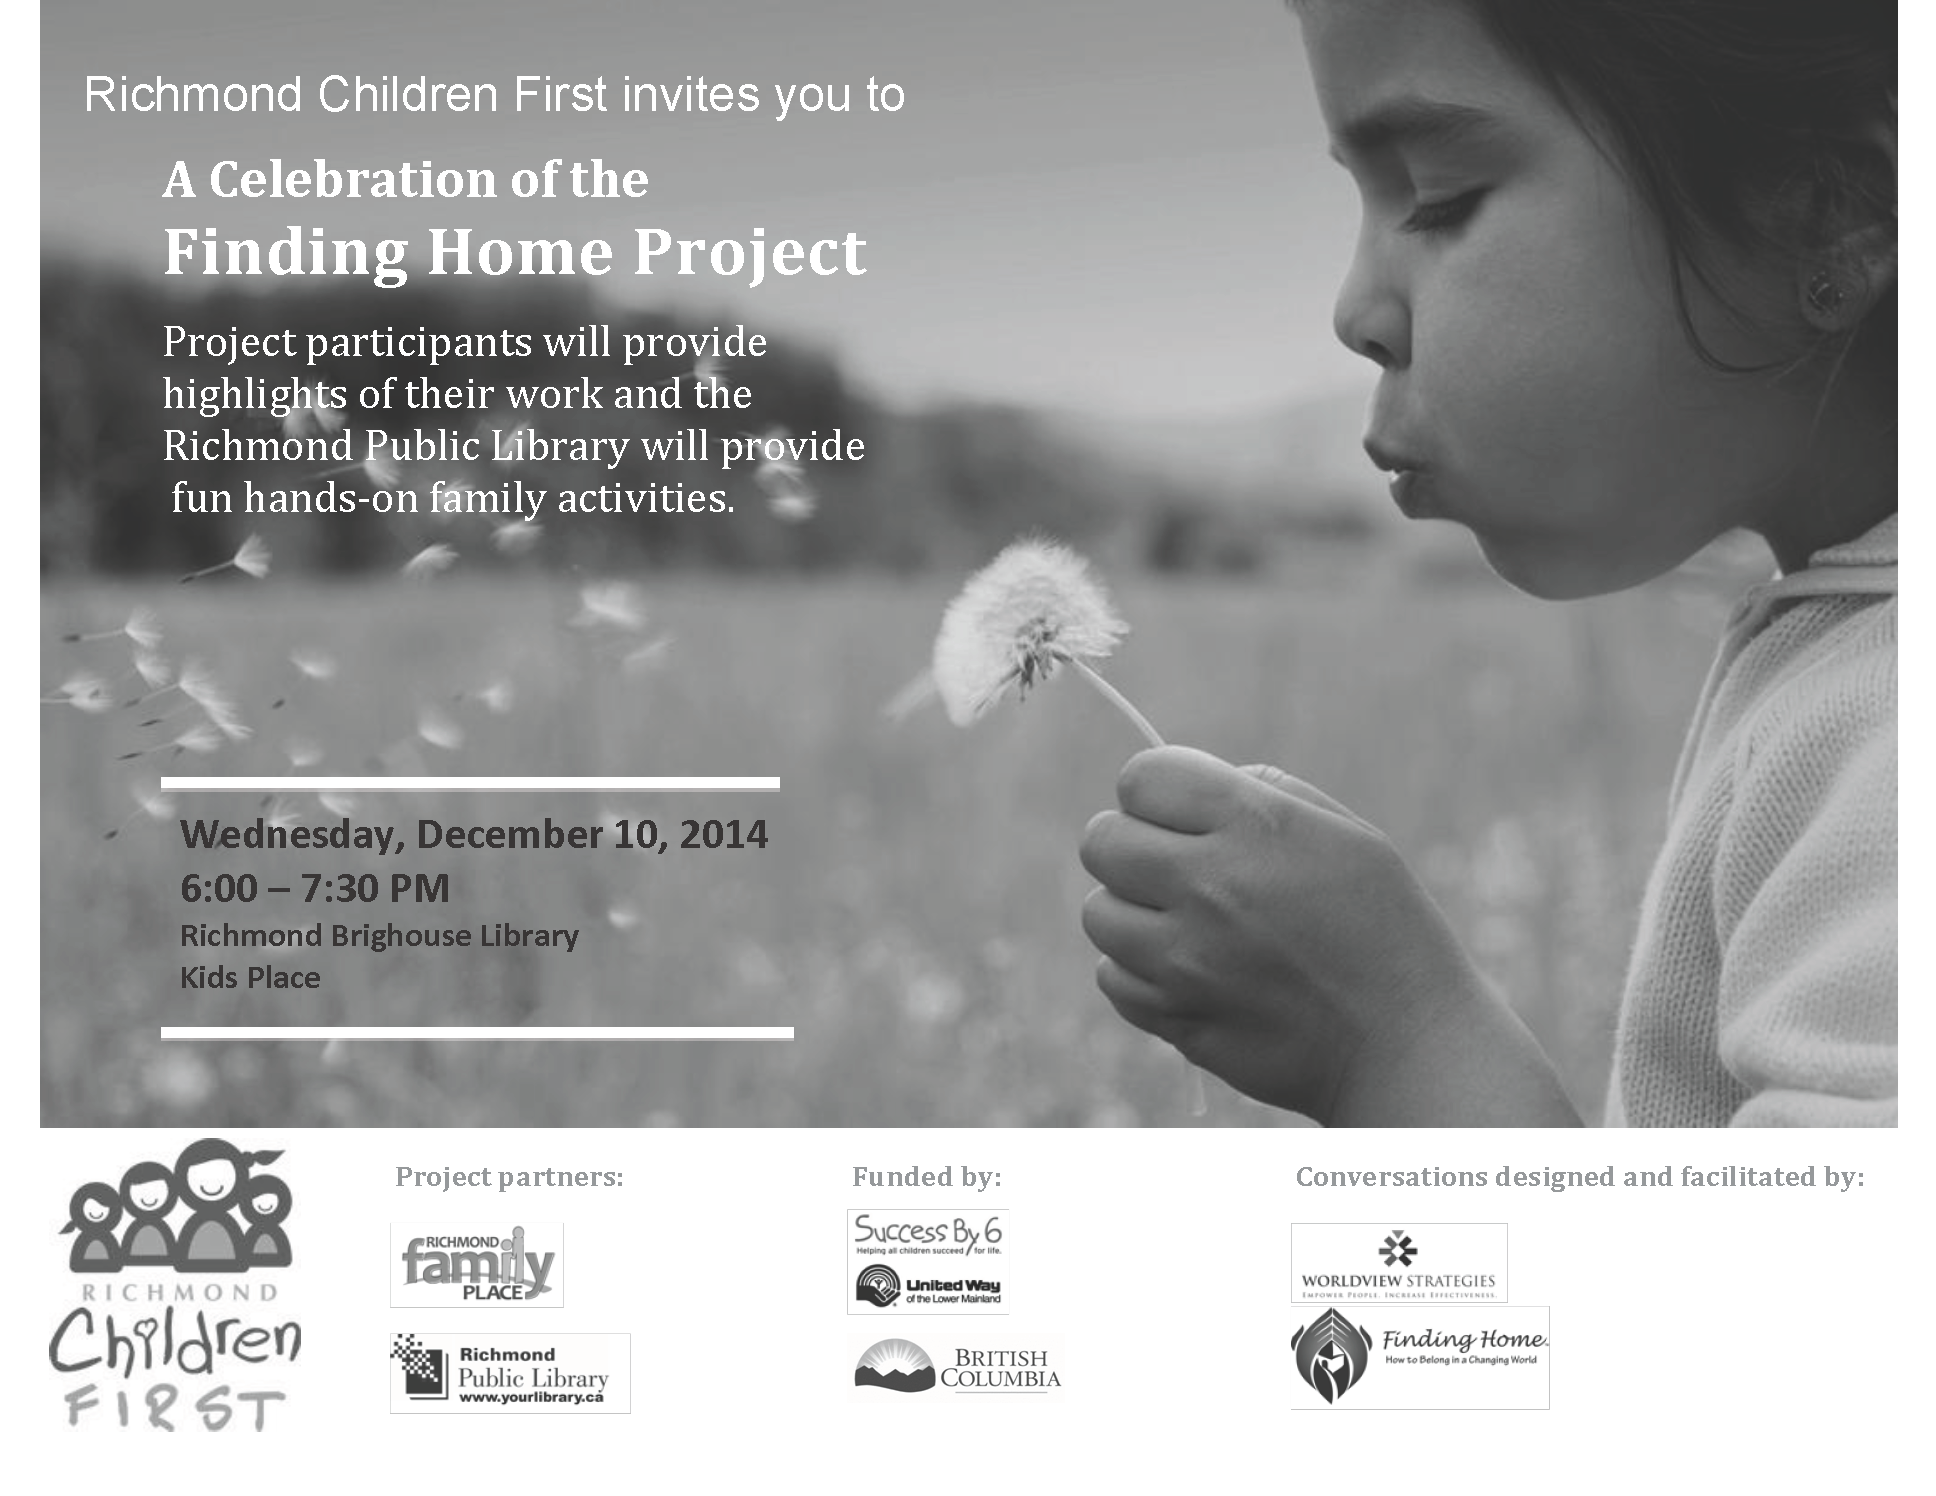 Richmond Children First Finding Home Project poster